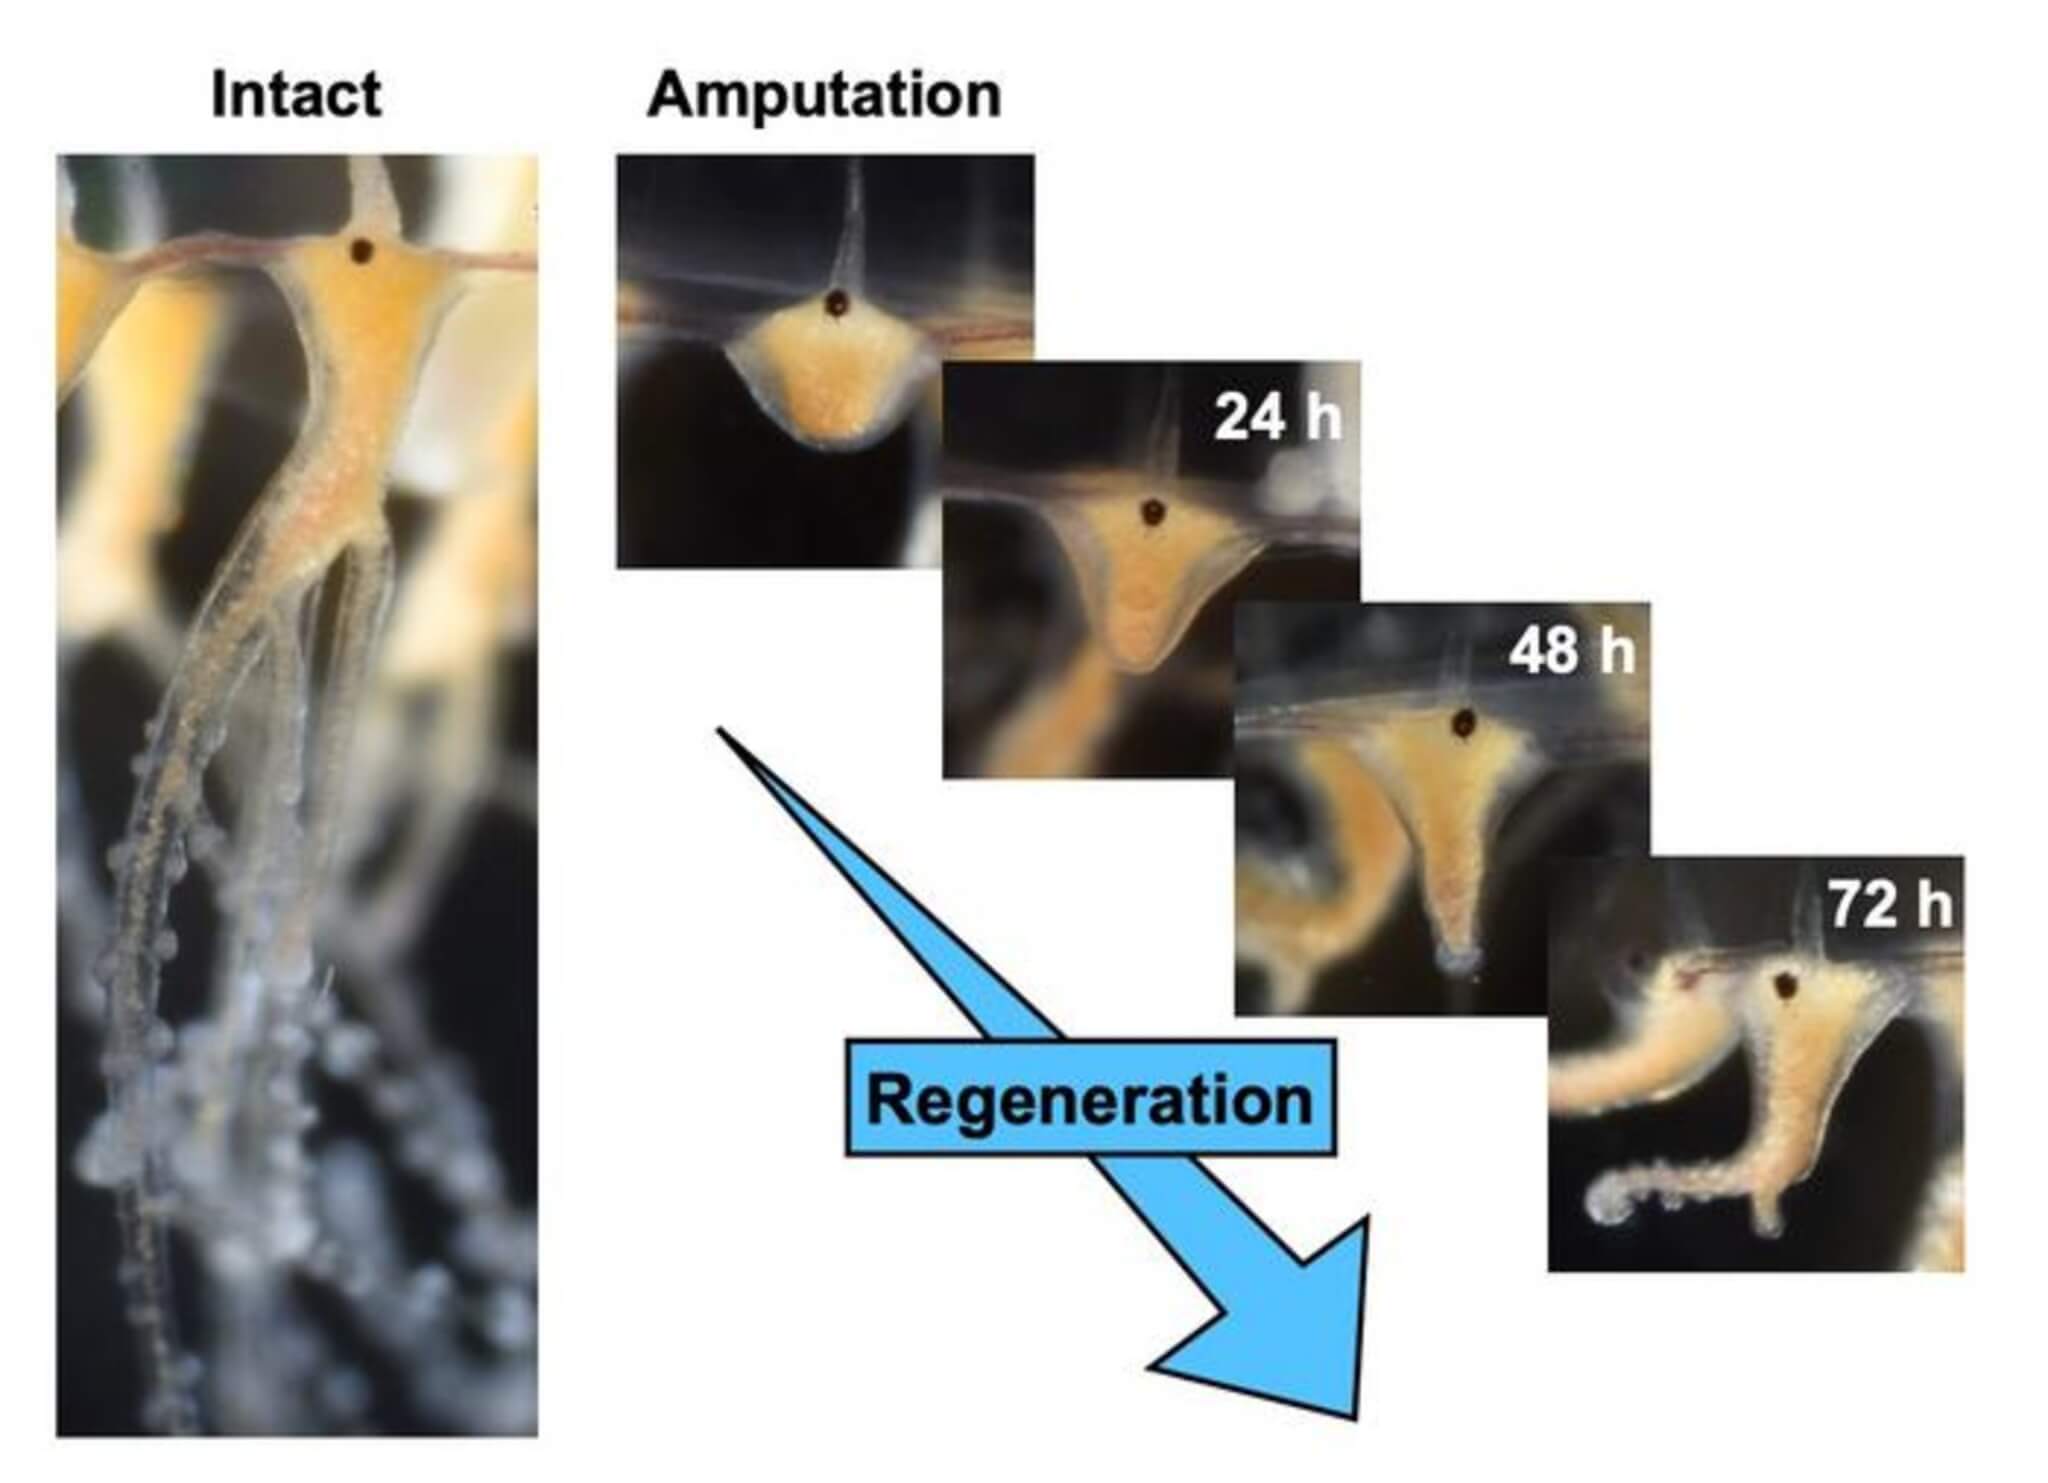 At 72 hours after amputation, the regenerating tentacle of Cladonema is fully functional